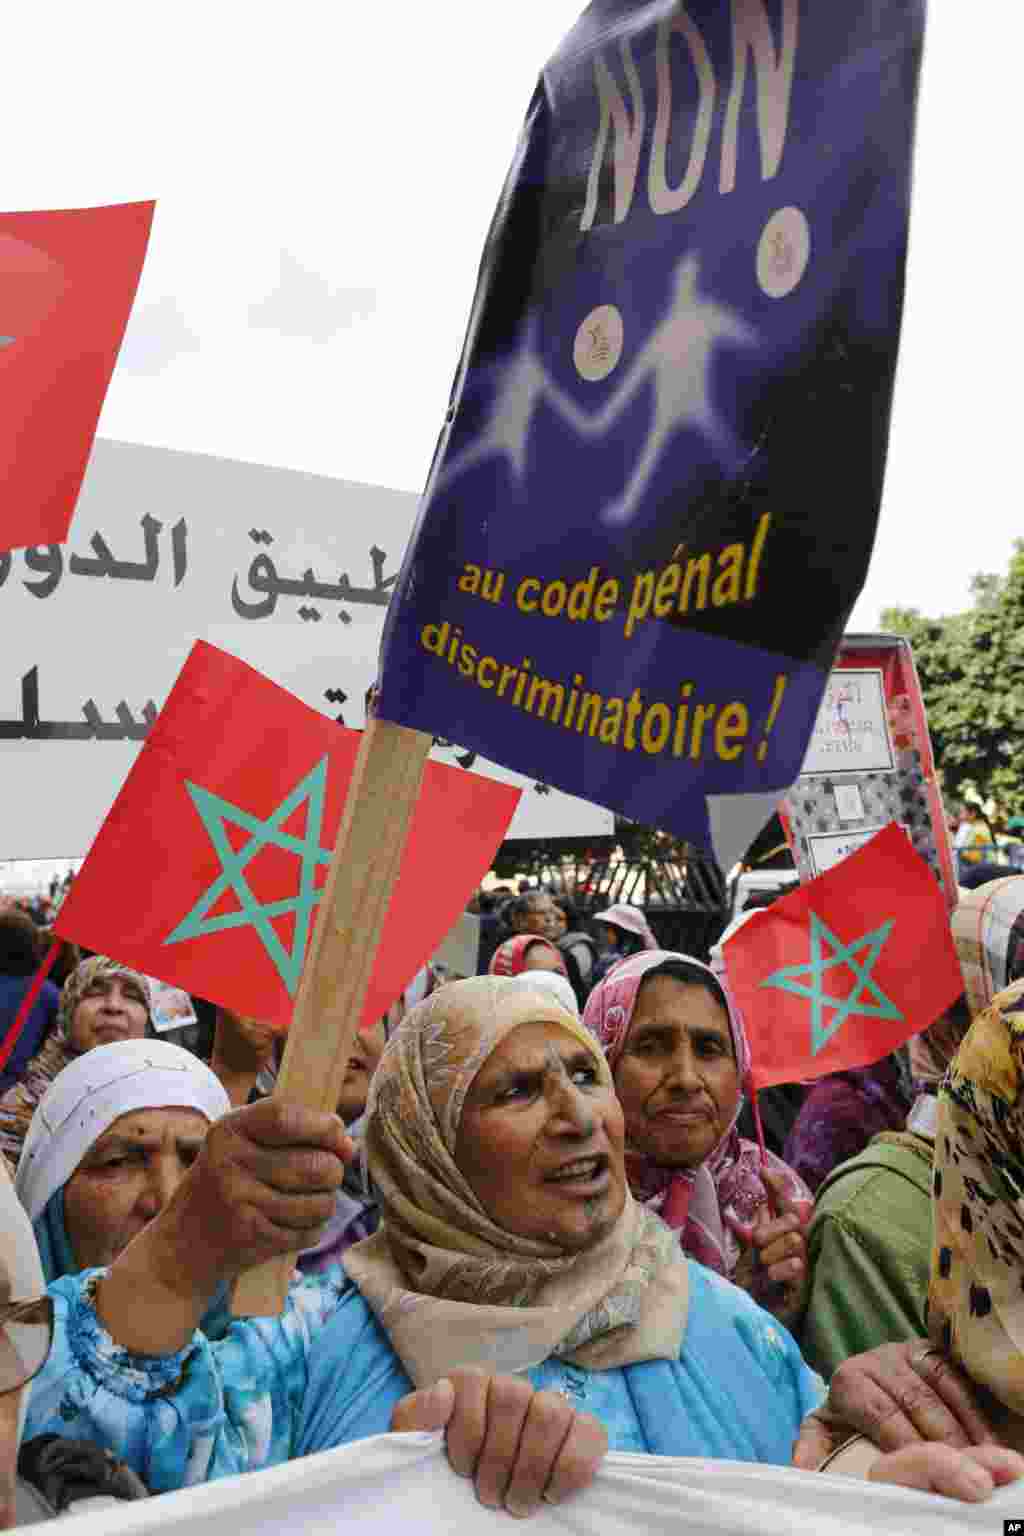 A Moroccan old woman shouts slogans as she holds a placard witch reads "No discriminatory penal code" during a march to mark International Women's Day in Rabat, Morocco, March 8, 2015.